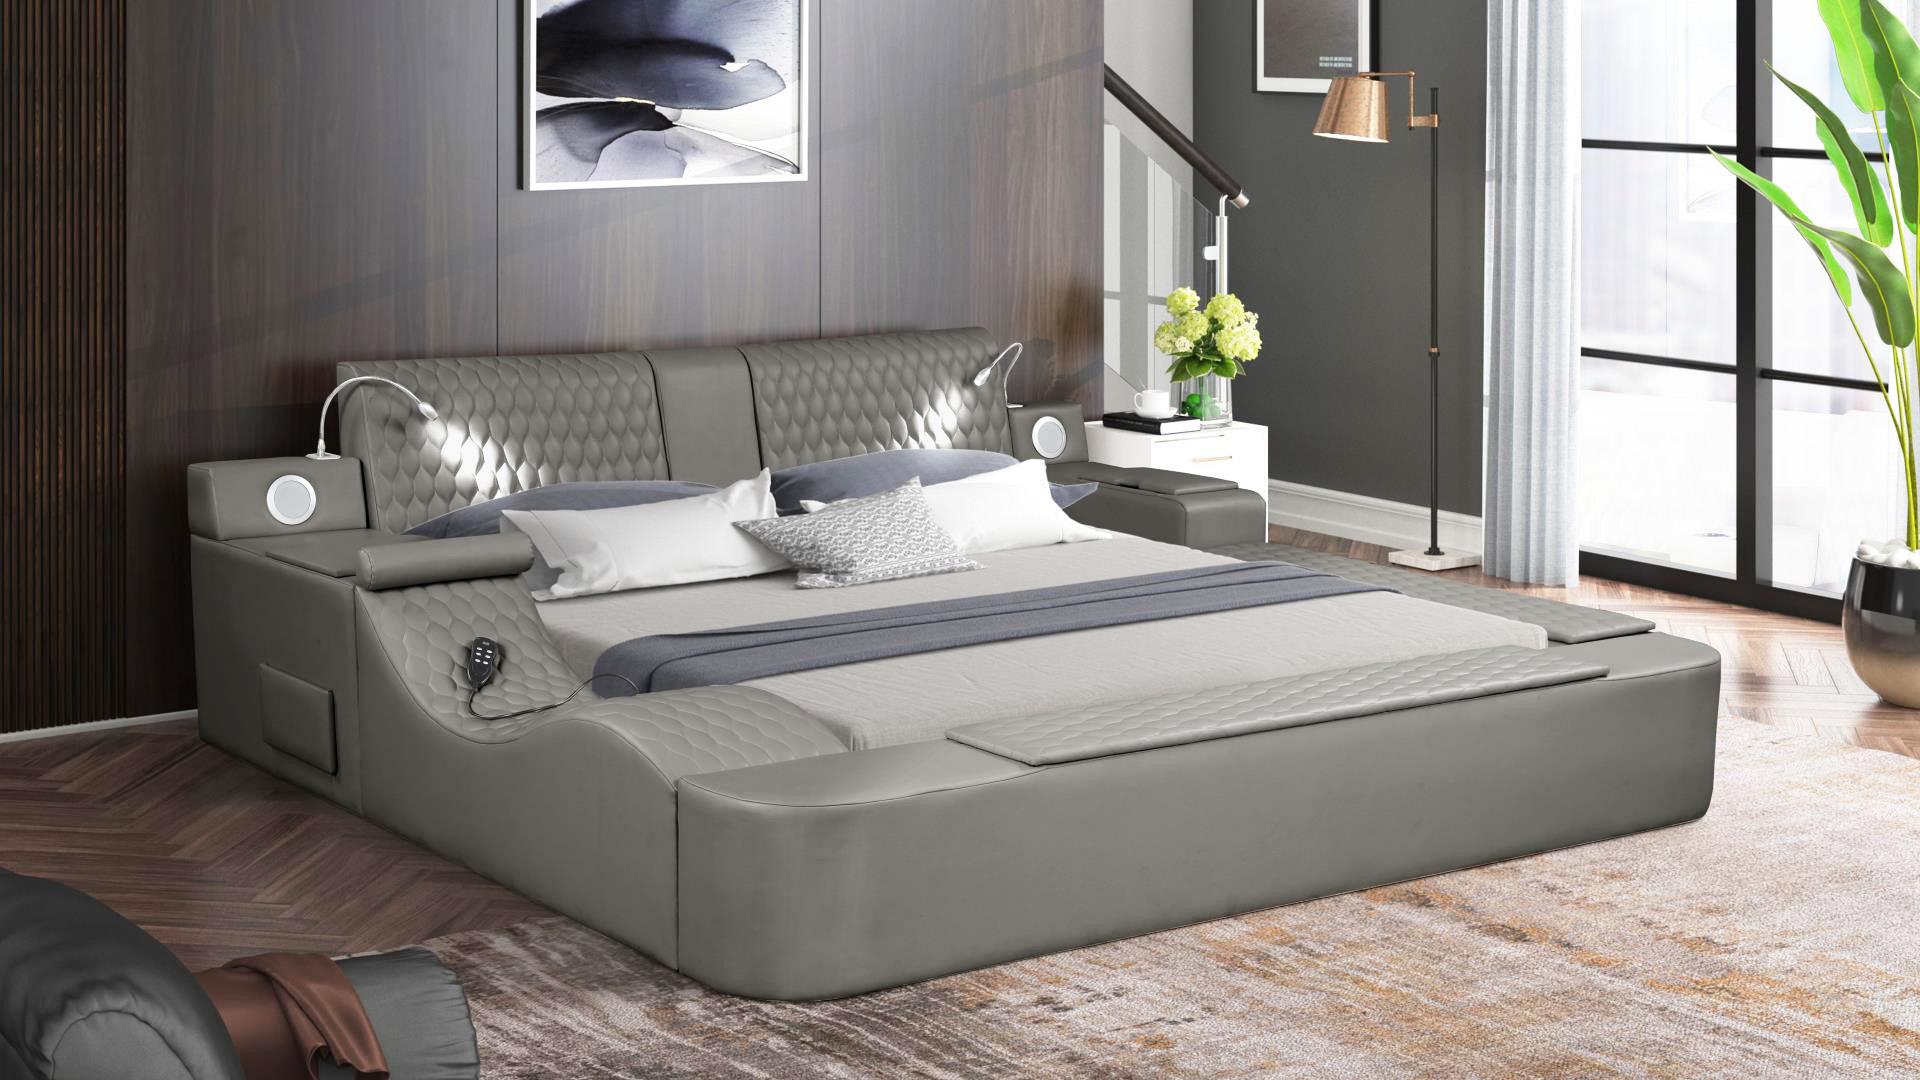 

    
Gray Eco Leather Smart Multifunctional Queen Bed ZOYA Galaxy Home Contemporary
